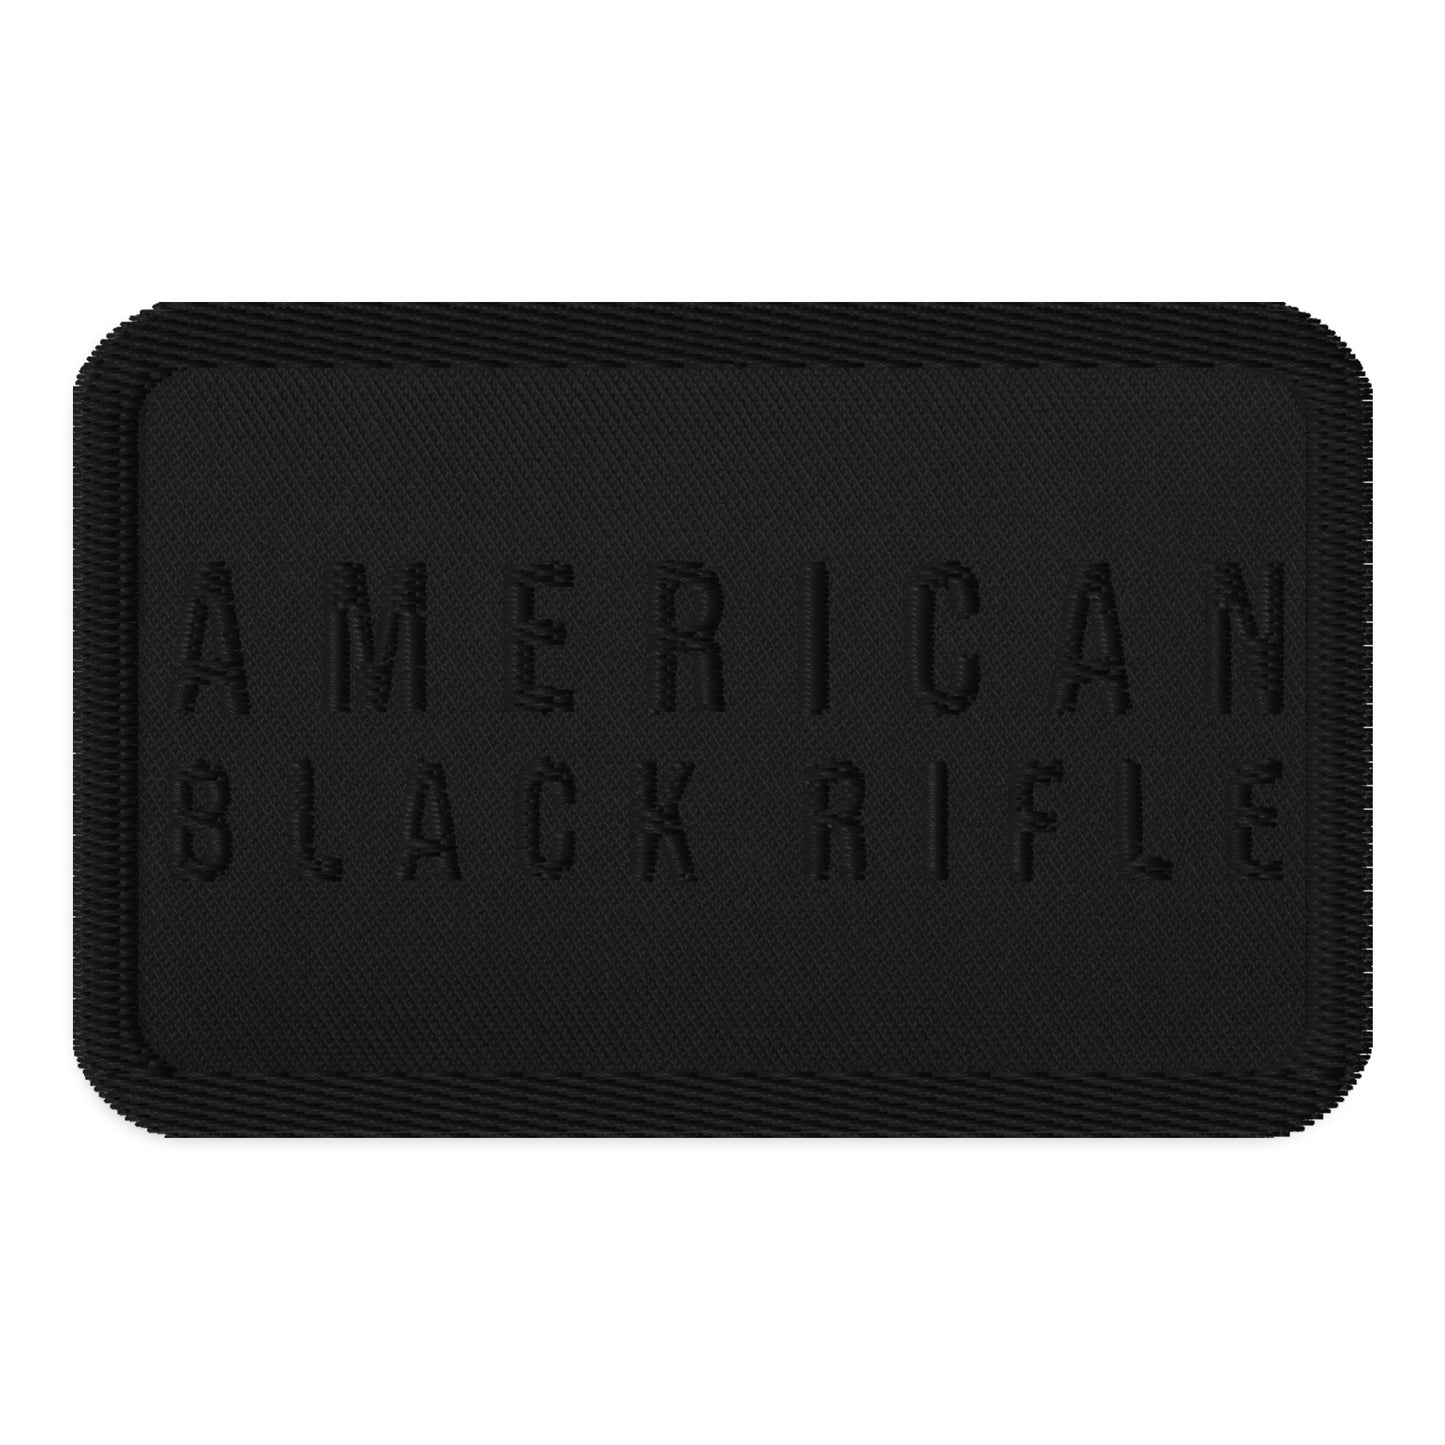 American Black Rifle BST Embroidered patches